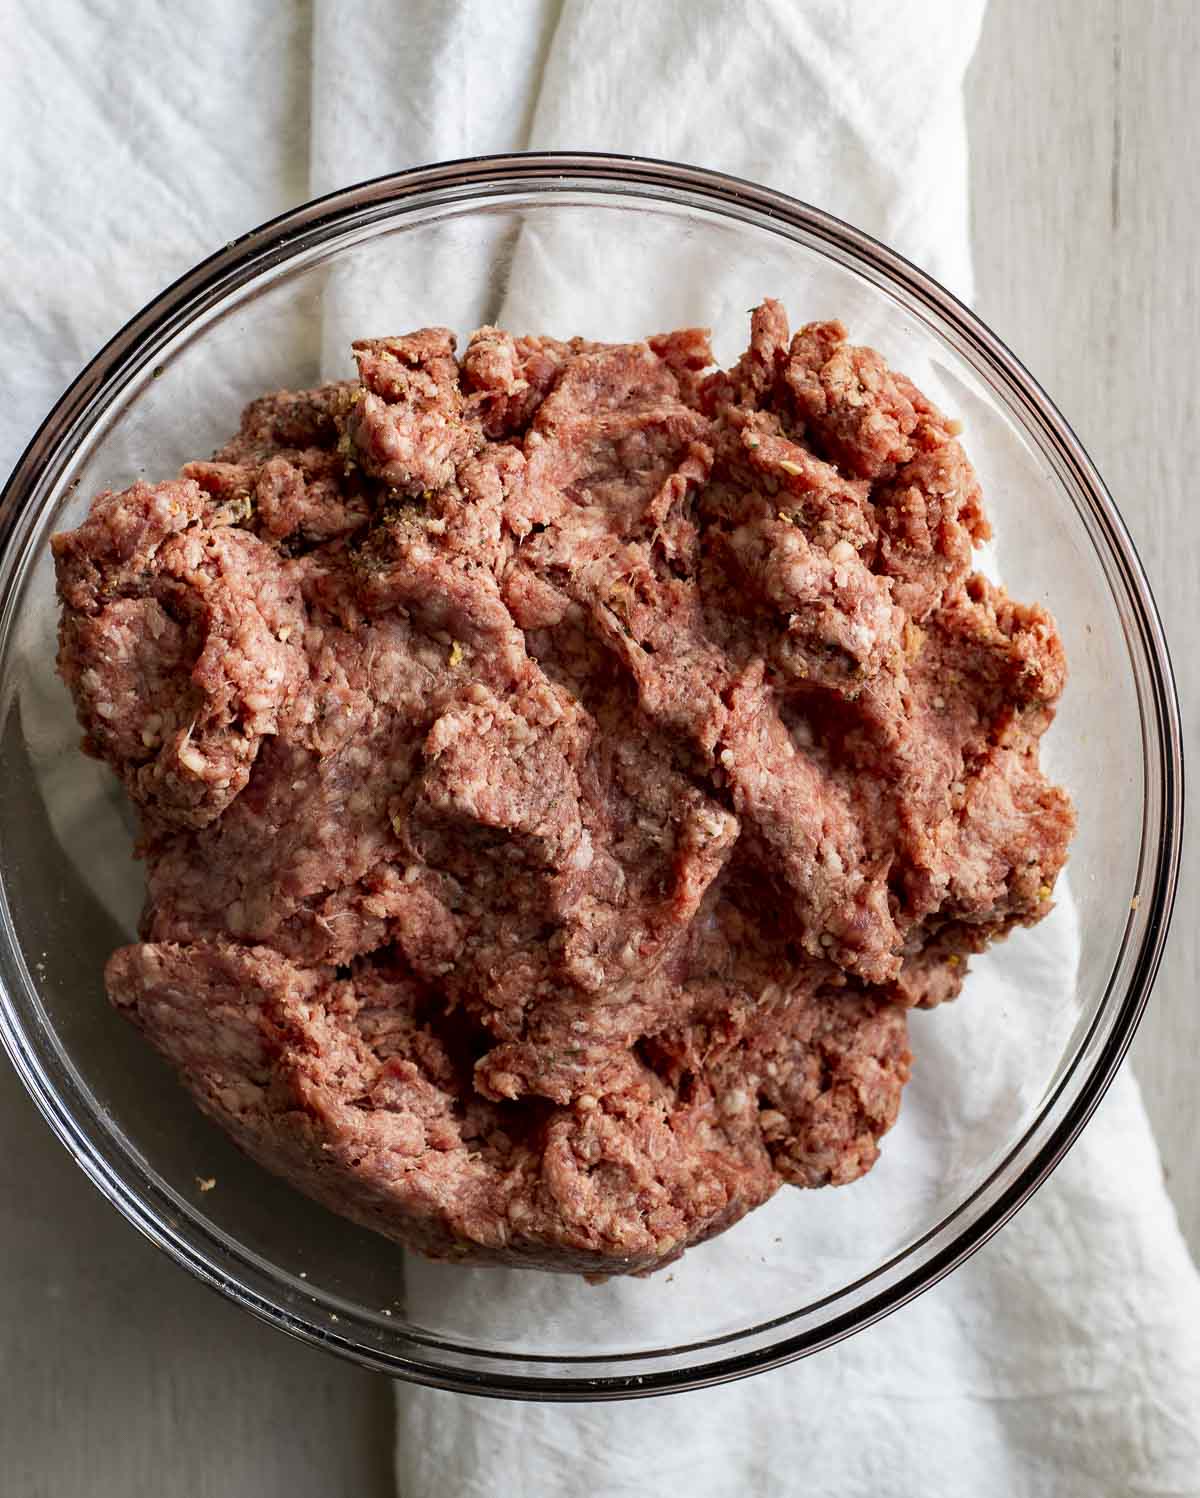 Ground beef burger mixture in a glass bowl.